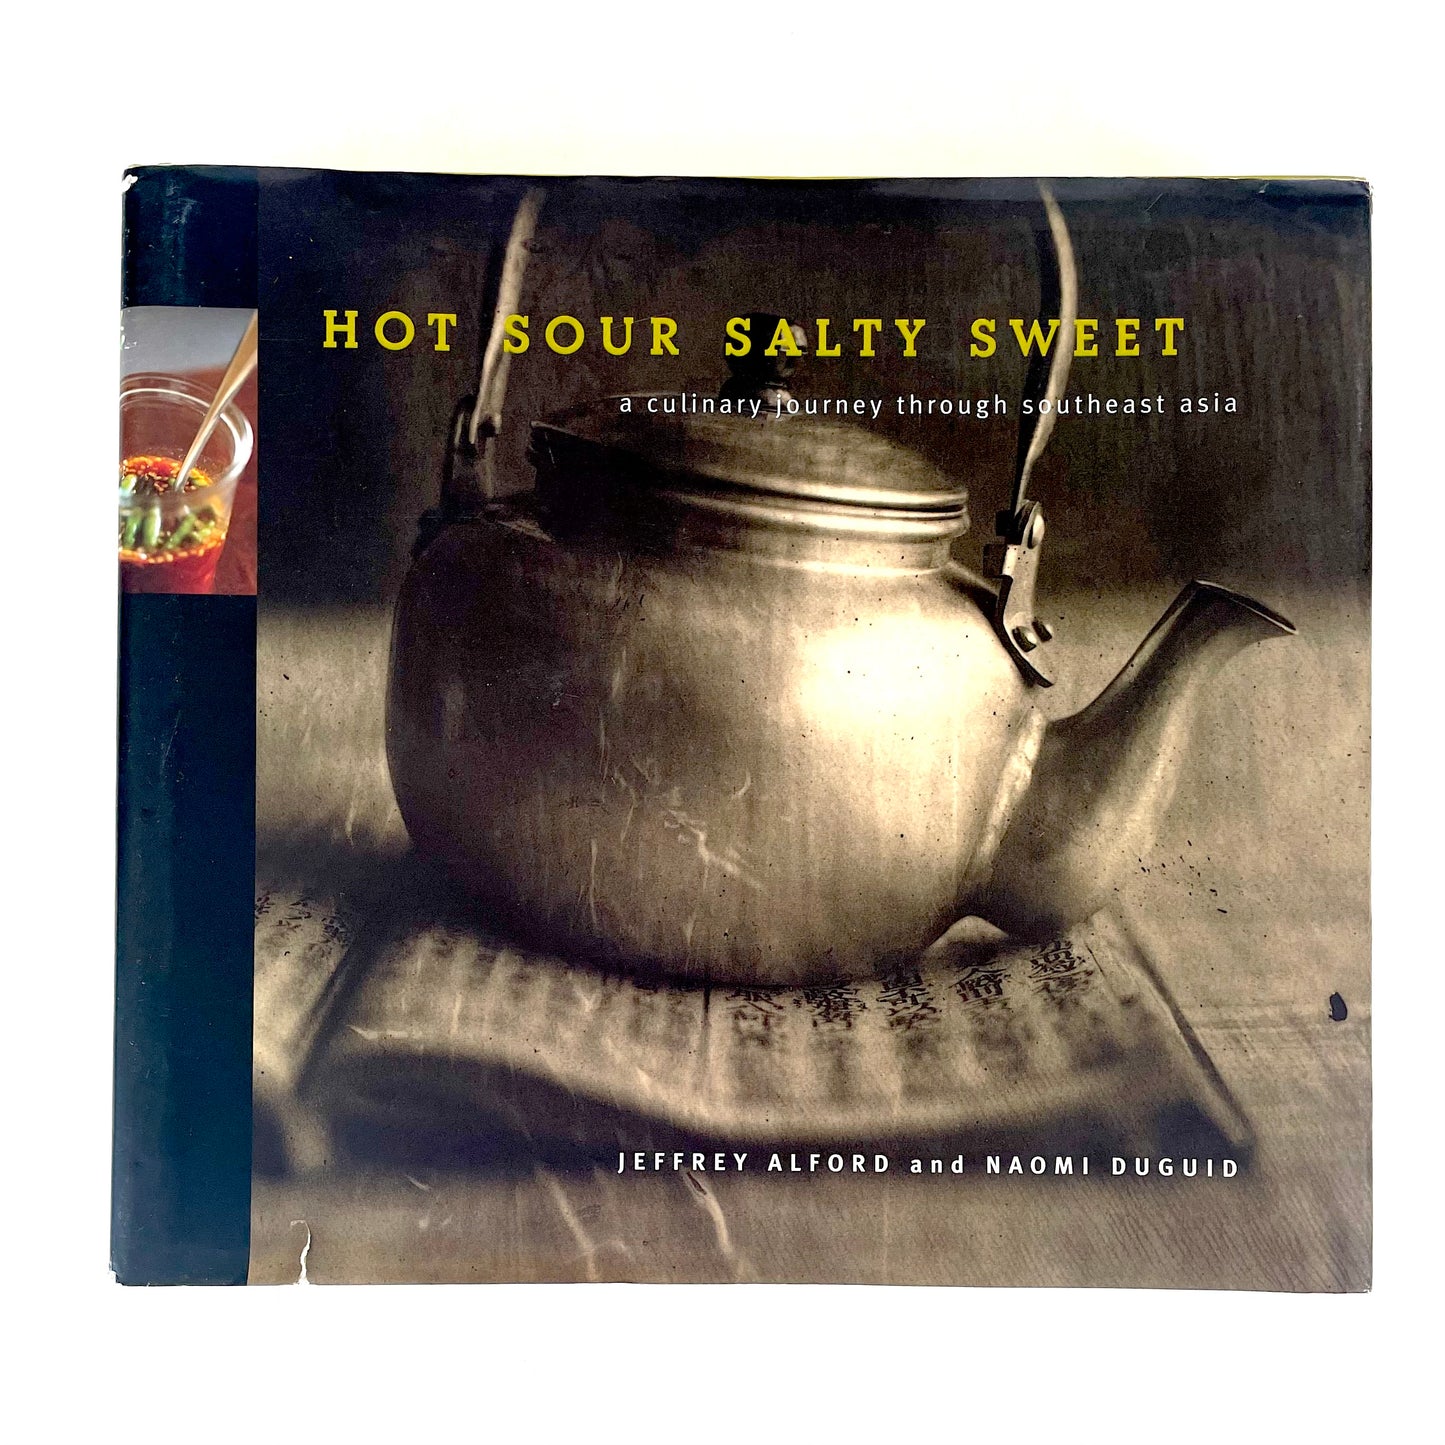 Hot Sour Salty Sweet by Jeffrey Alford & Naomi Duguid